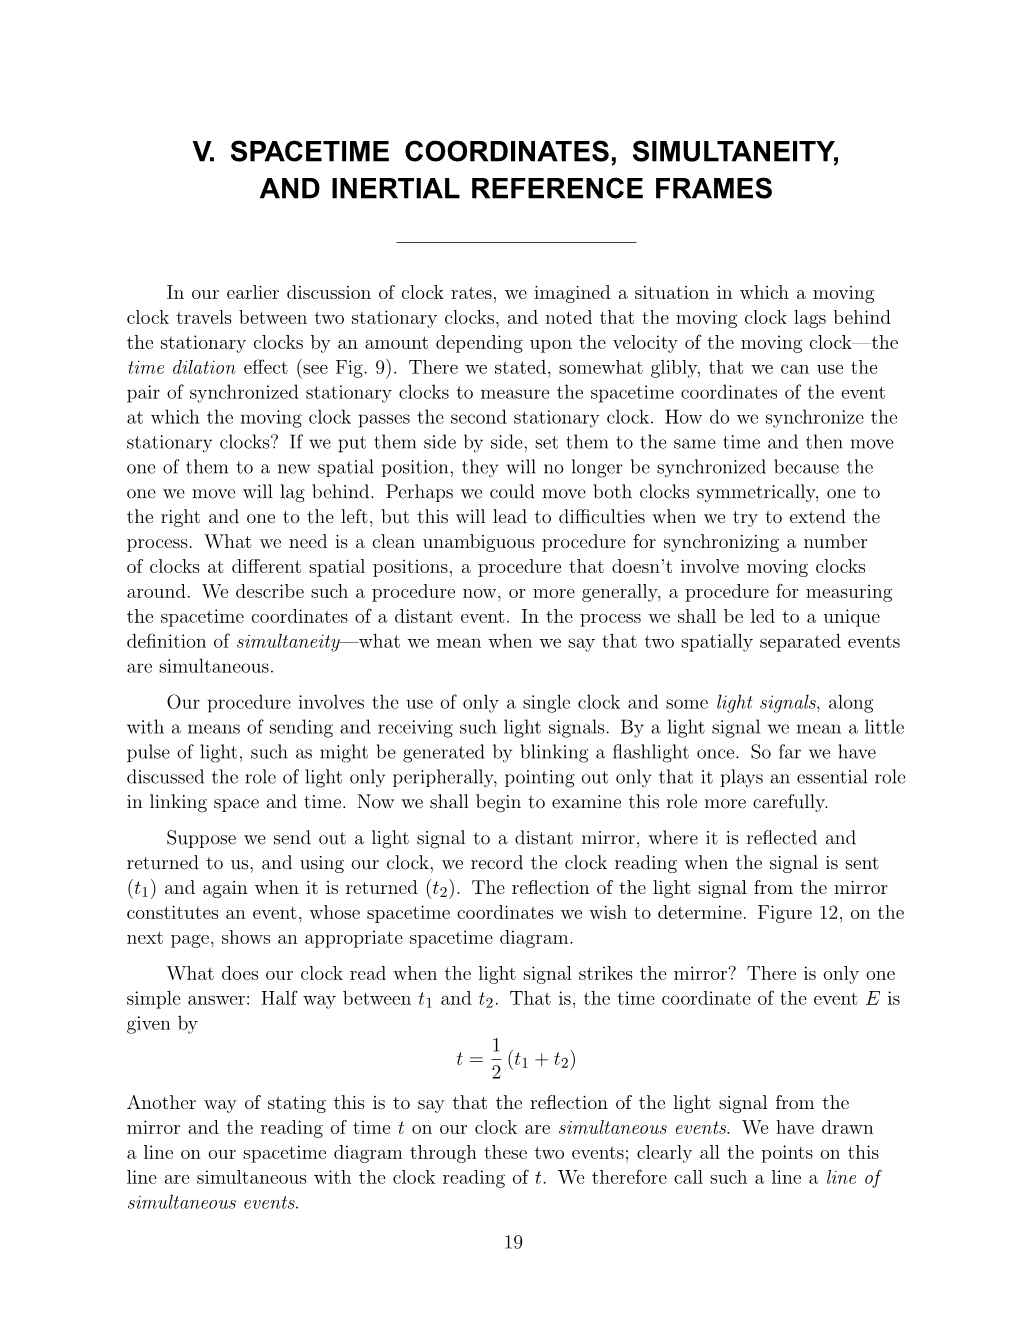 V. Spacetime Coordinates, Simultaneity, and Inertial Reference Frames